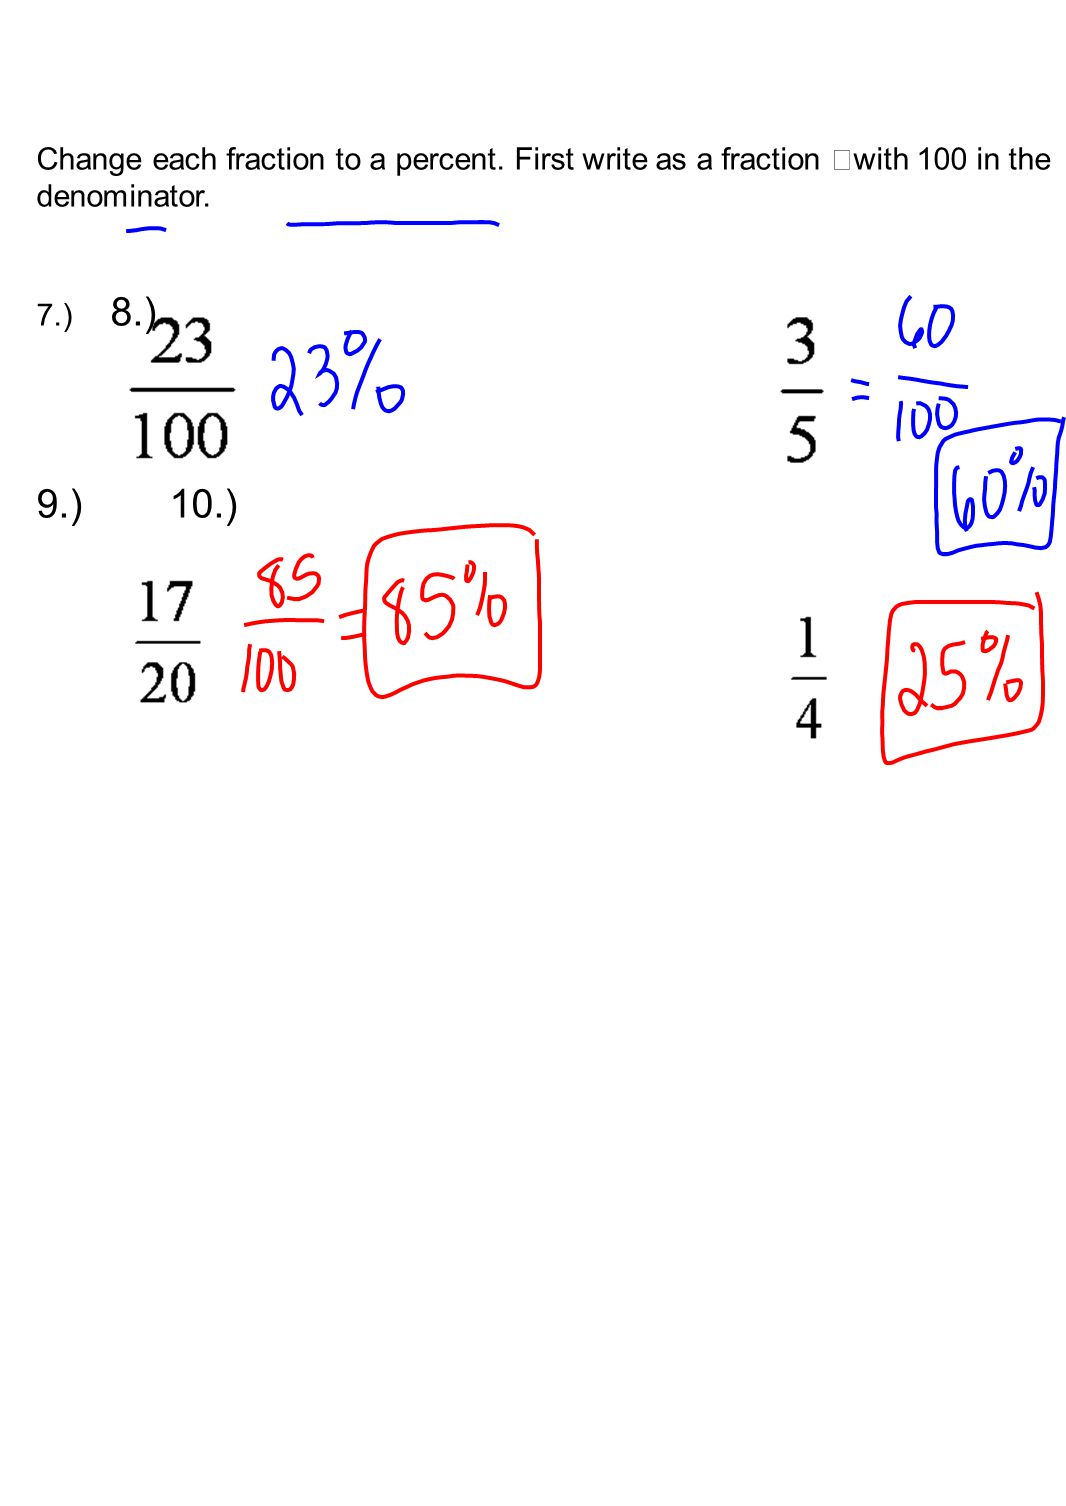 Change each fraction to a percent